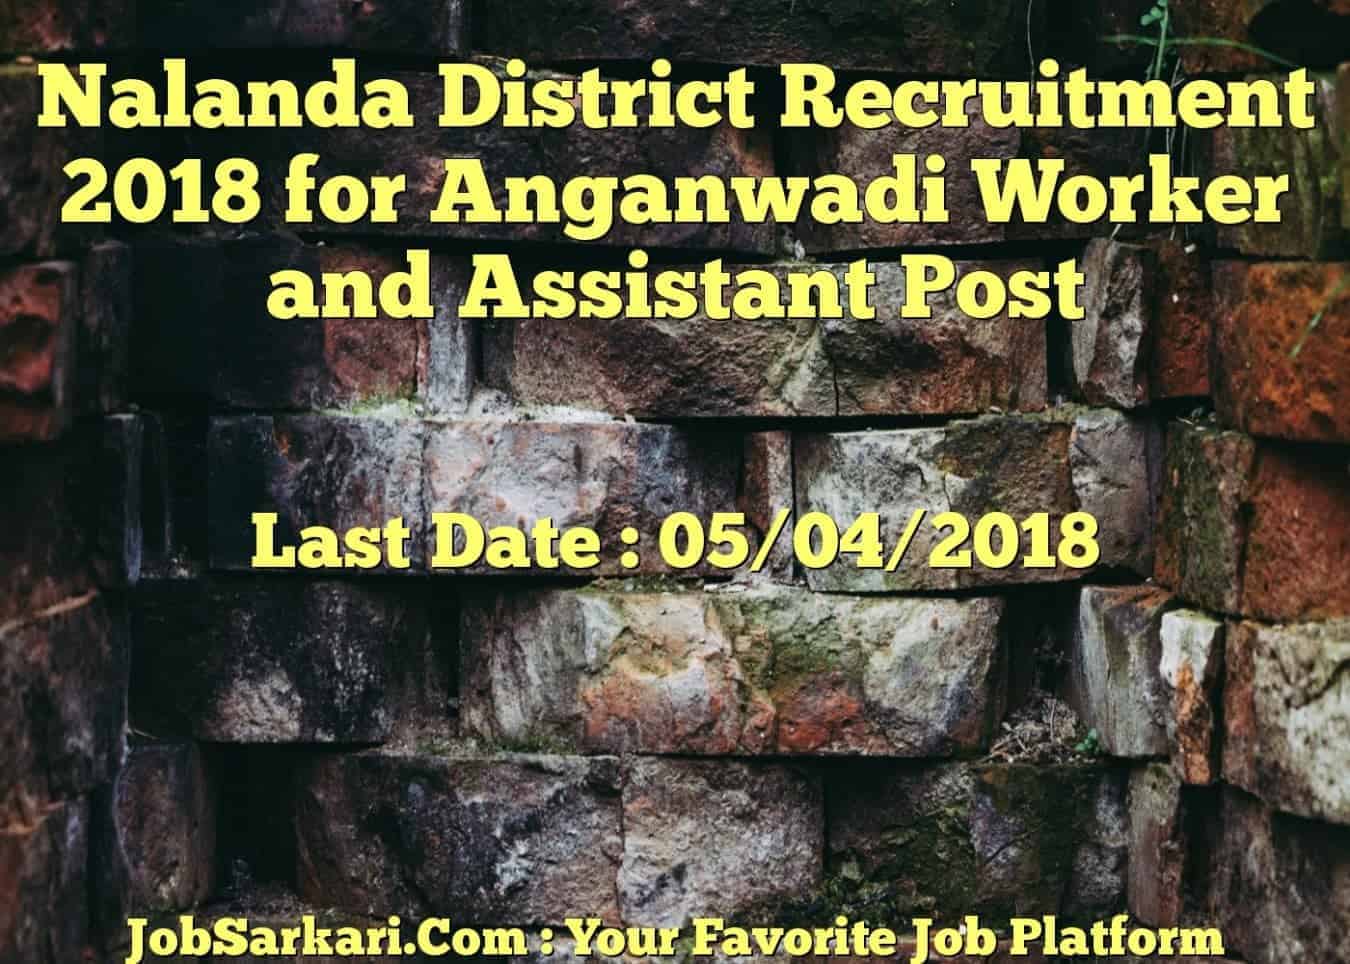 Nalanda District Recruitment 2018 for Anganwadi Worker and Assistant Post